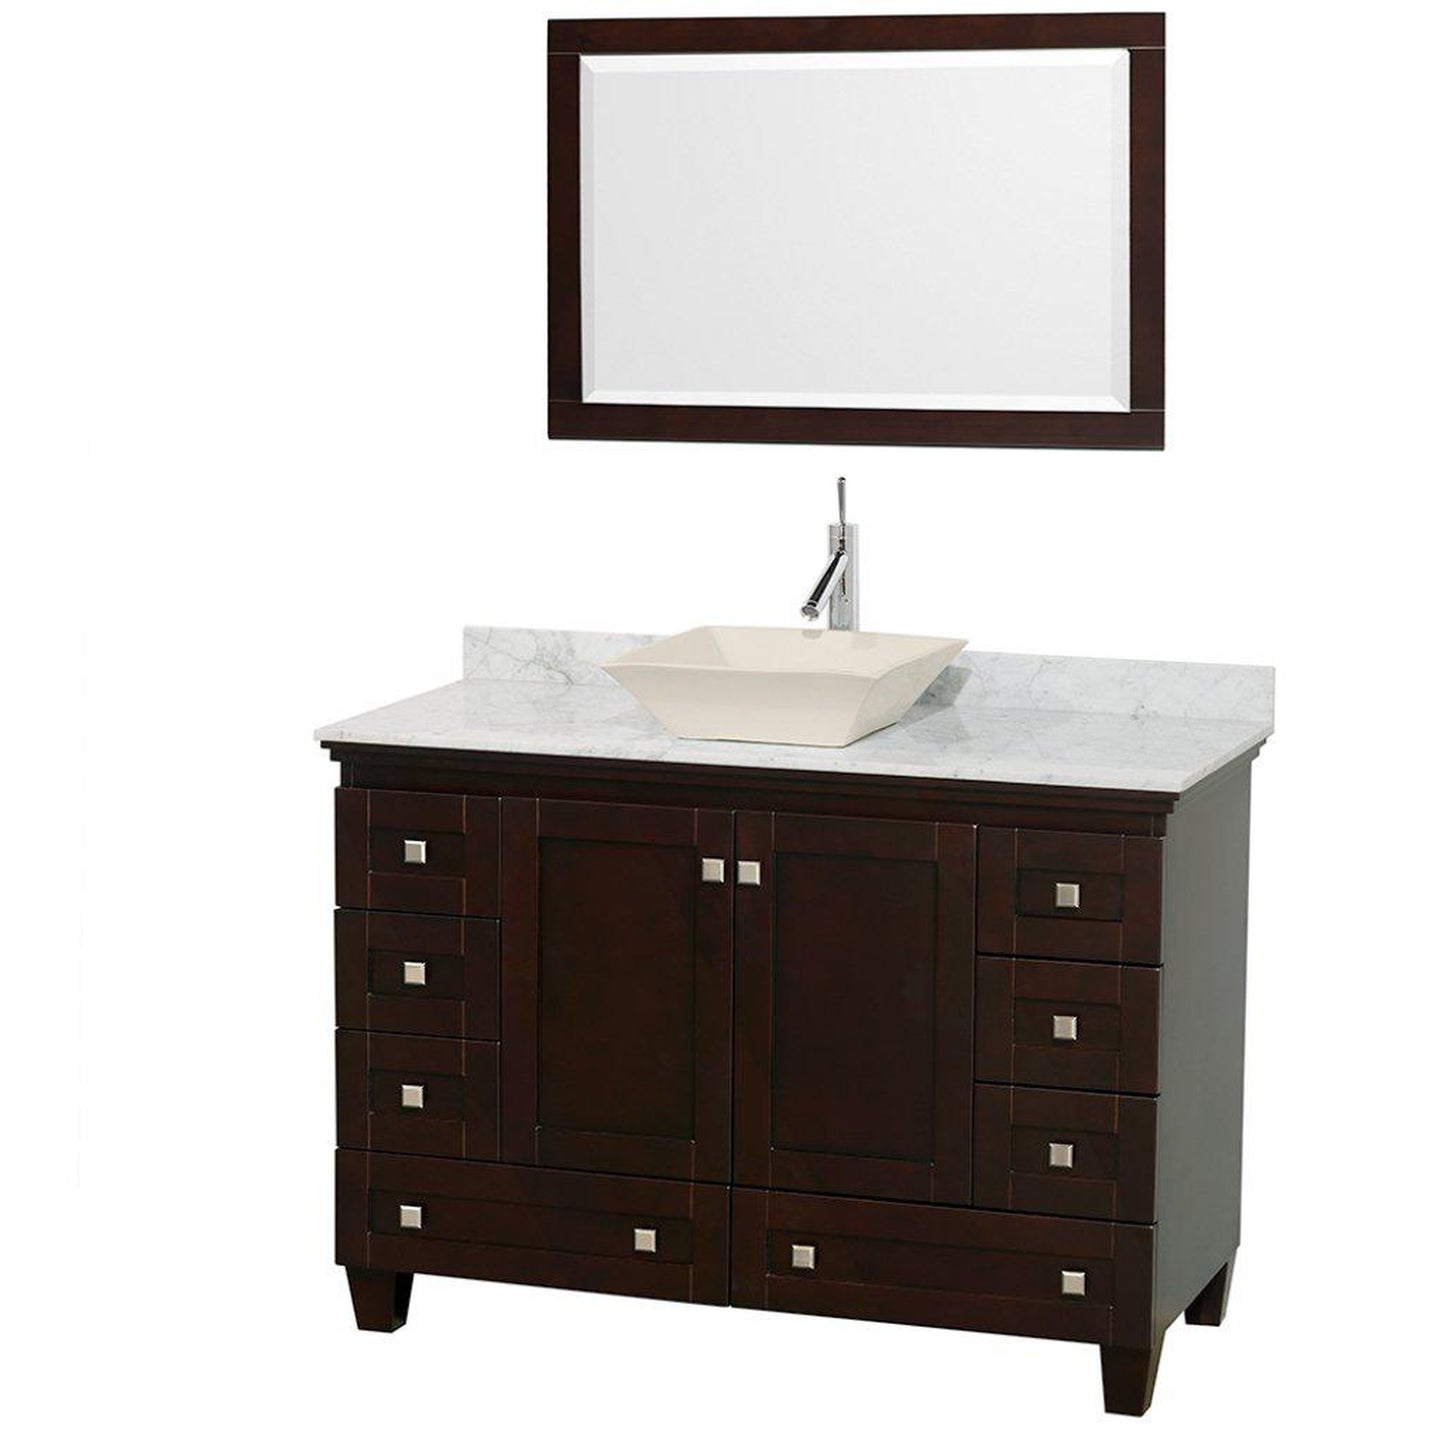 Wyndham Collection Acclaim 48" Single Bathroom Espresso Vanity Set With White Carrara Marble Countertop And Pyra Bone Sink And 24" Mirror